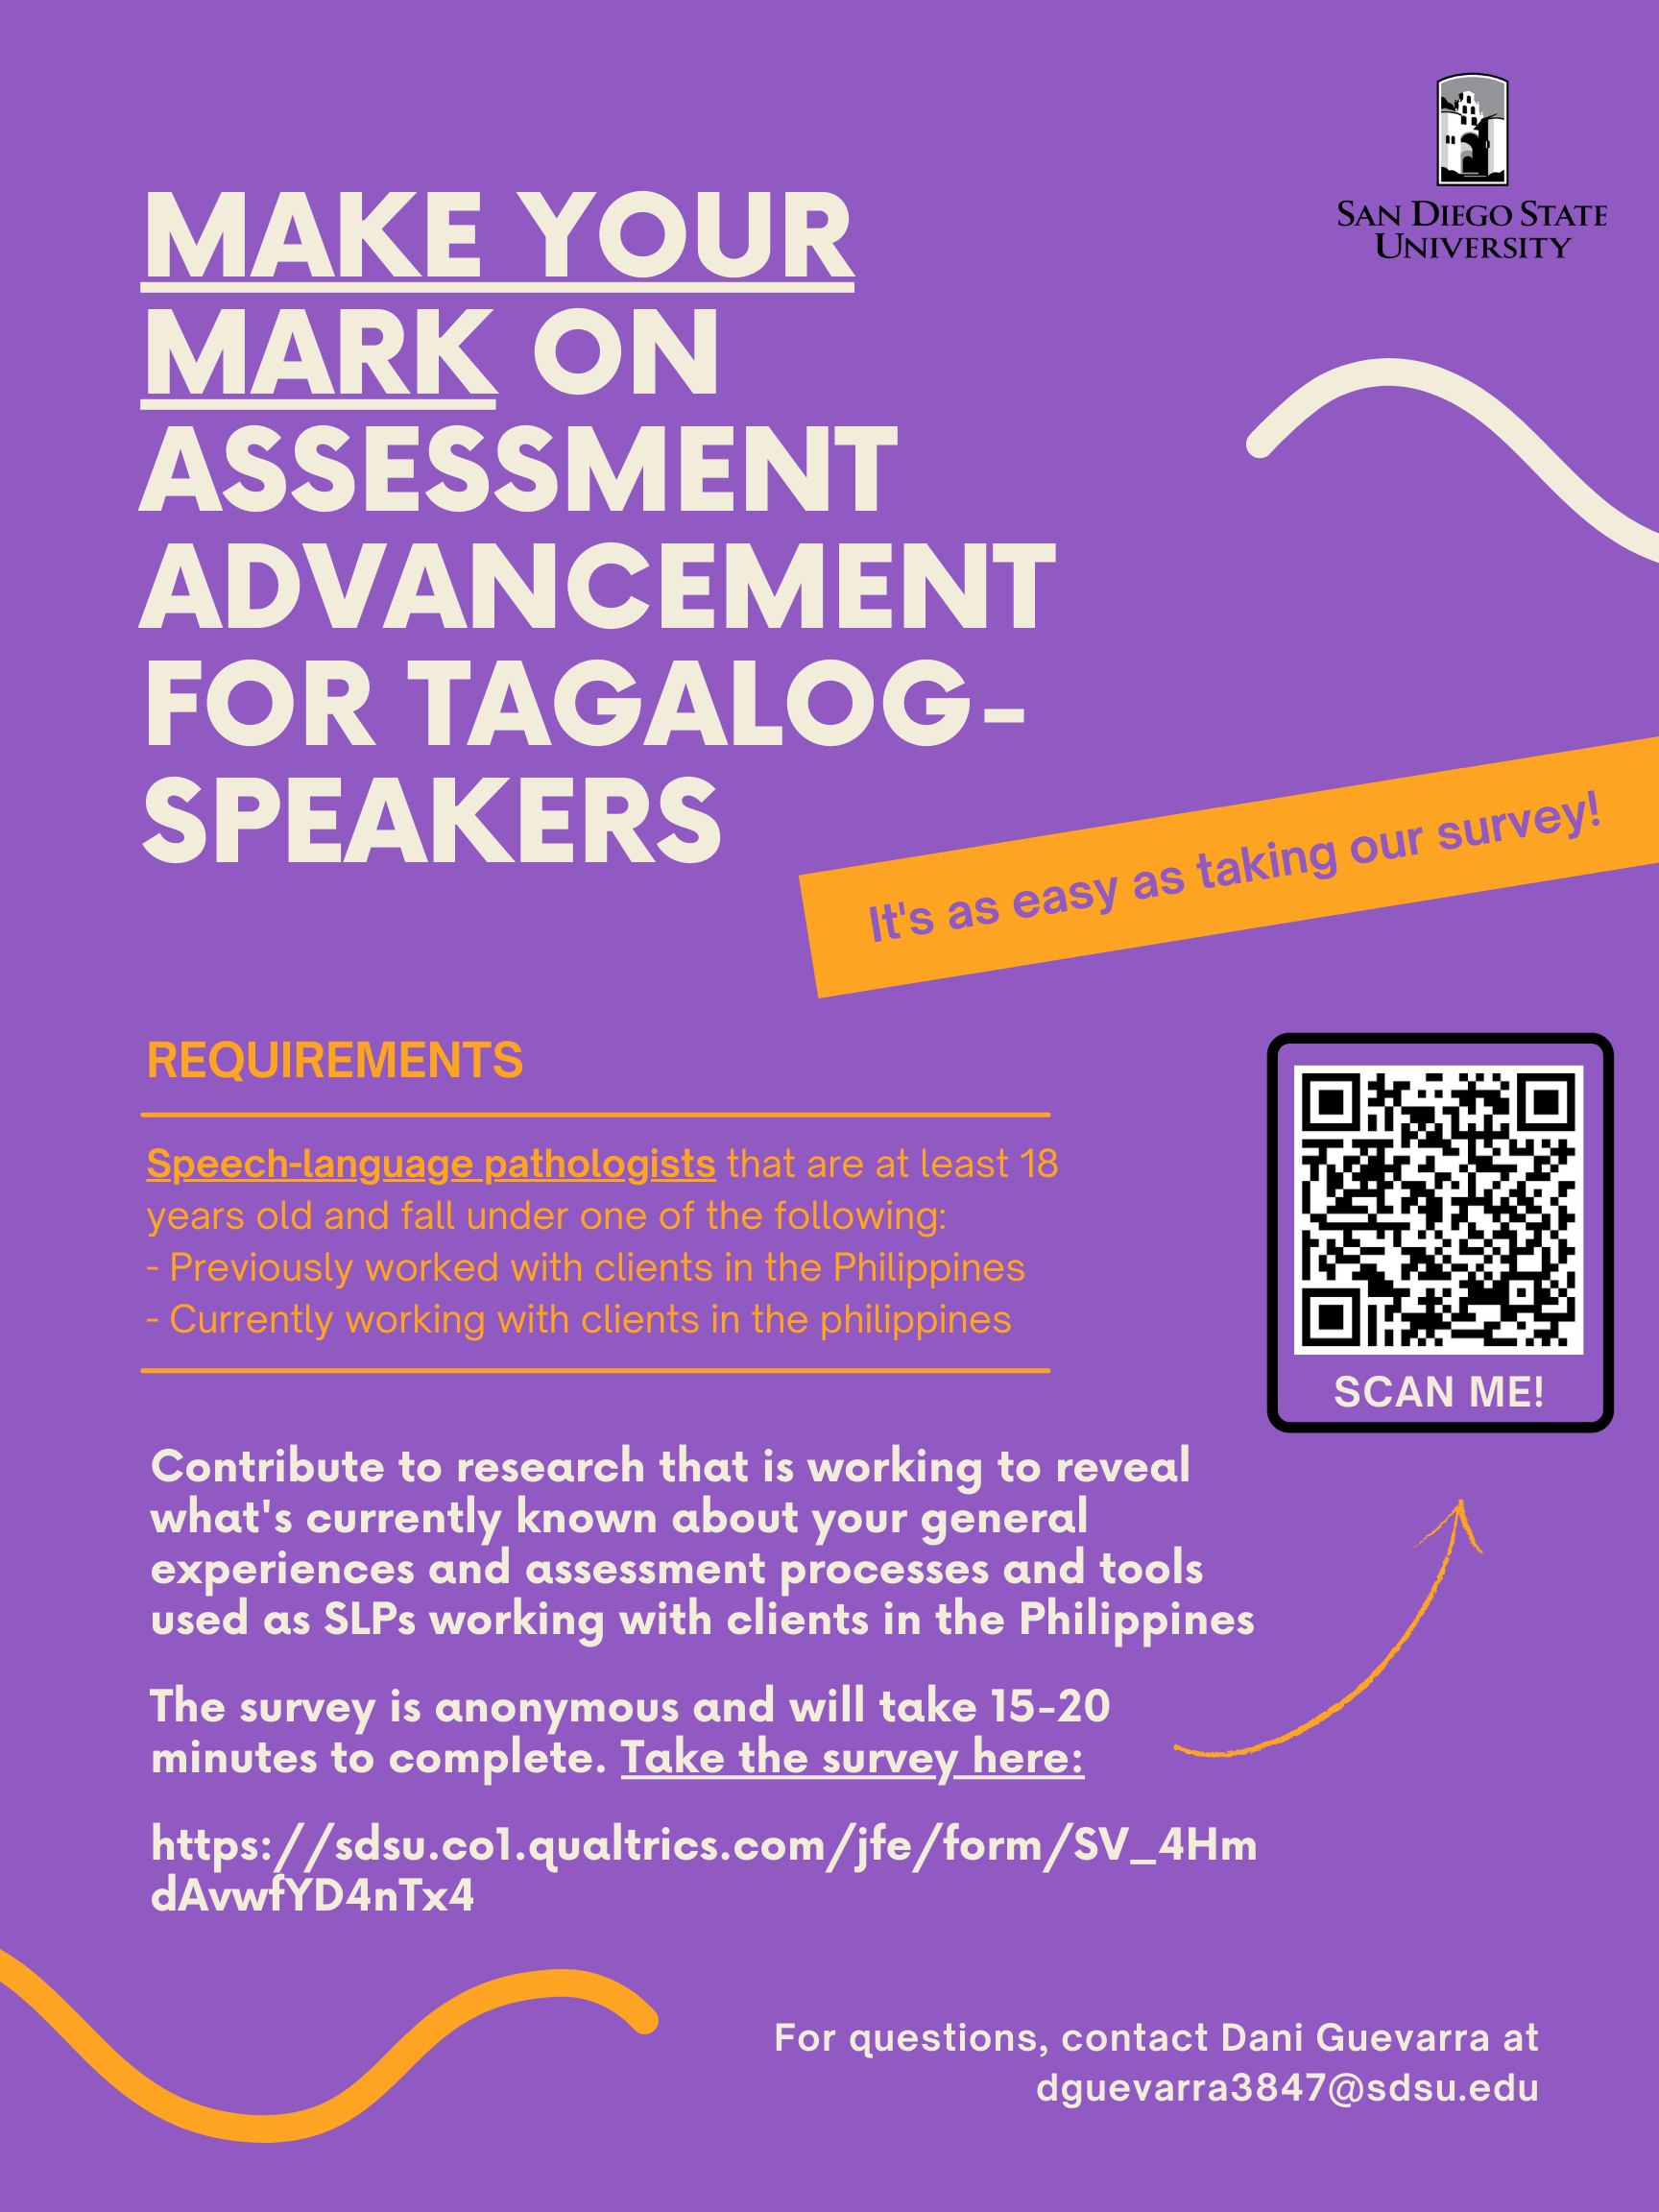 Make your mark on assessment advancement for tagalog-speakers 